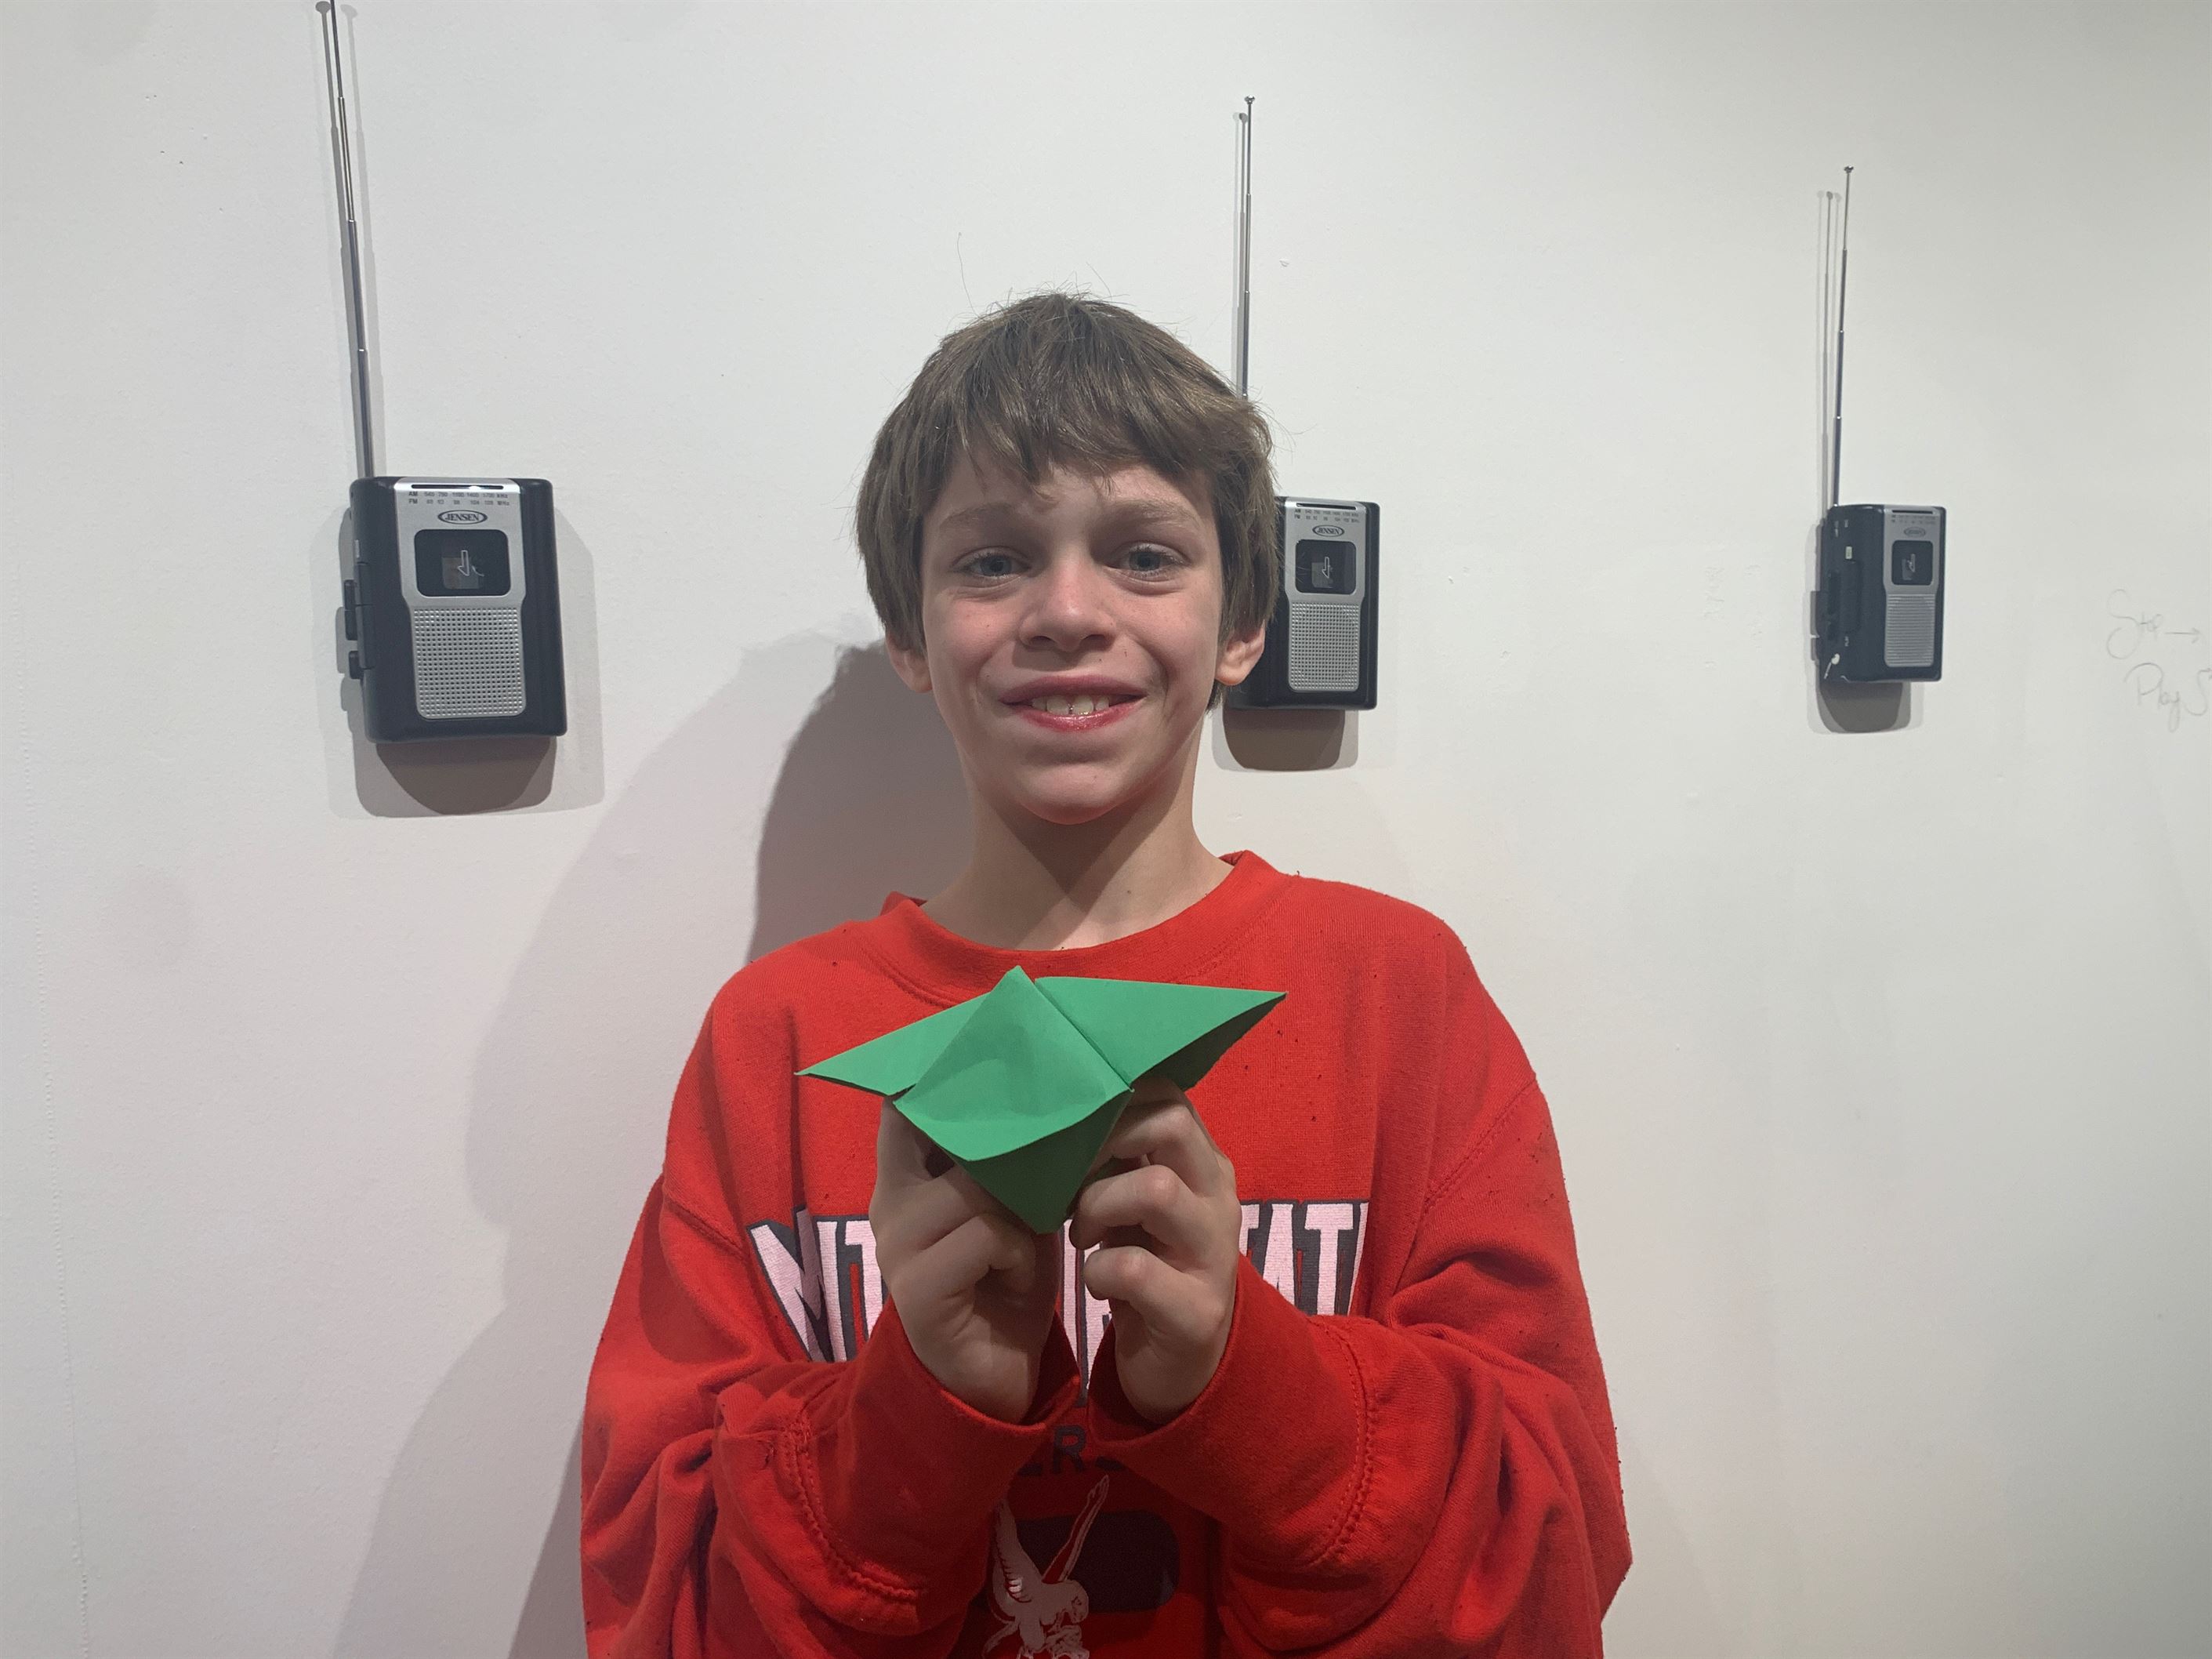 Ethan Ferraro was one of the children who took place in the art corner event on Saturday. Roxanne Gribbin | The Montclarion